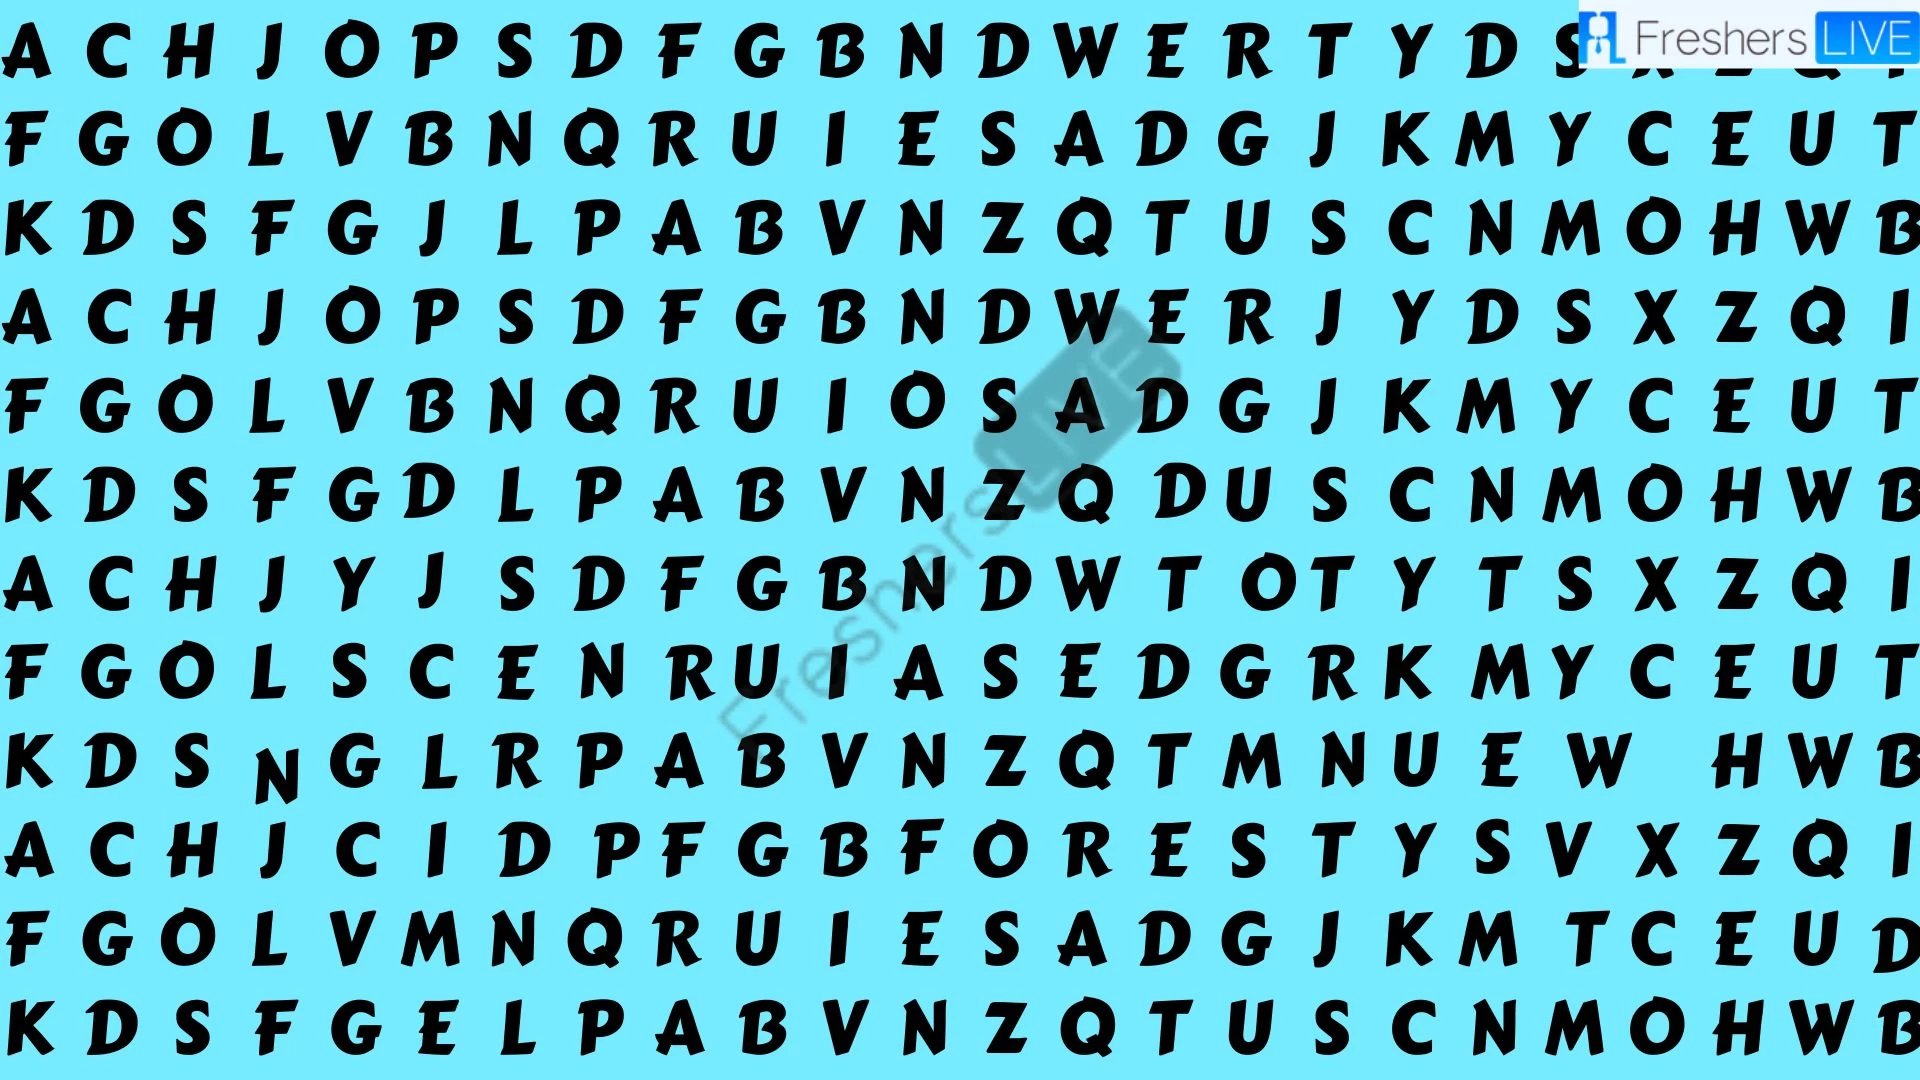 Only 4k Visual People Can Find the Word Forest in Just 10 Seconds